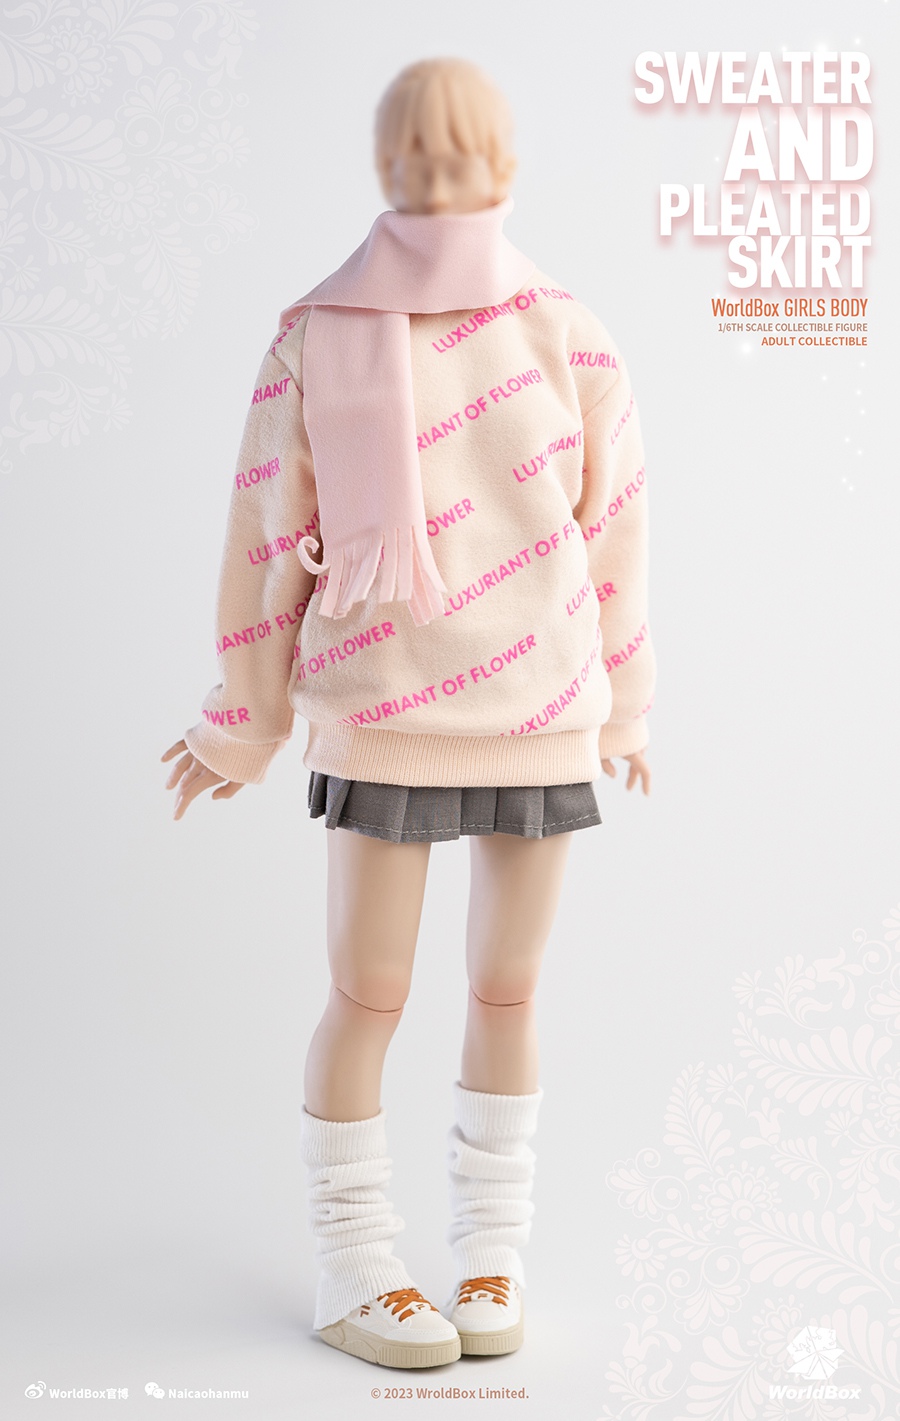 winter - NEW PRODUCT: Worldbox - clothing tag - "Winter Girl" 0393